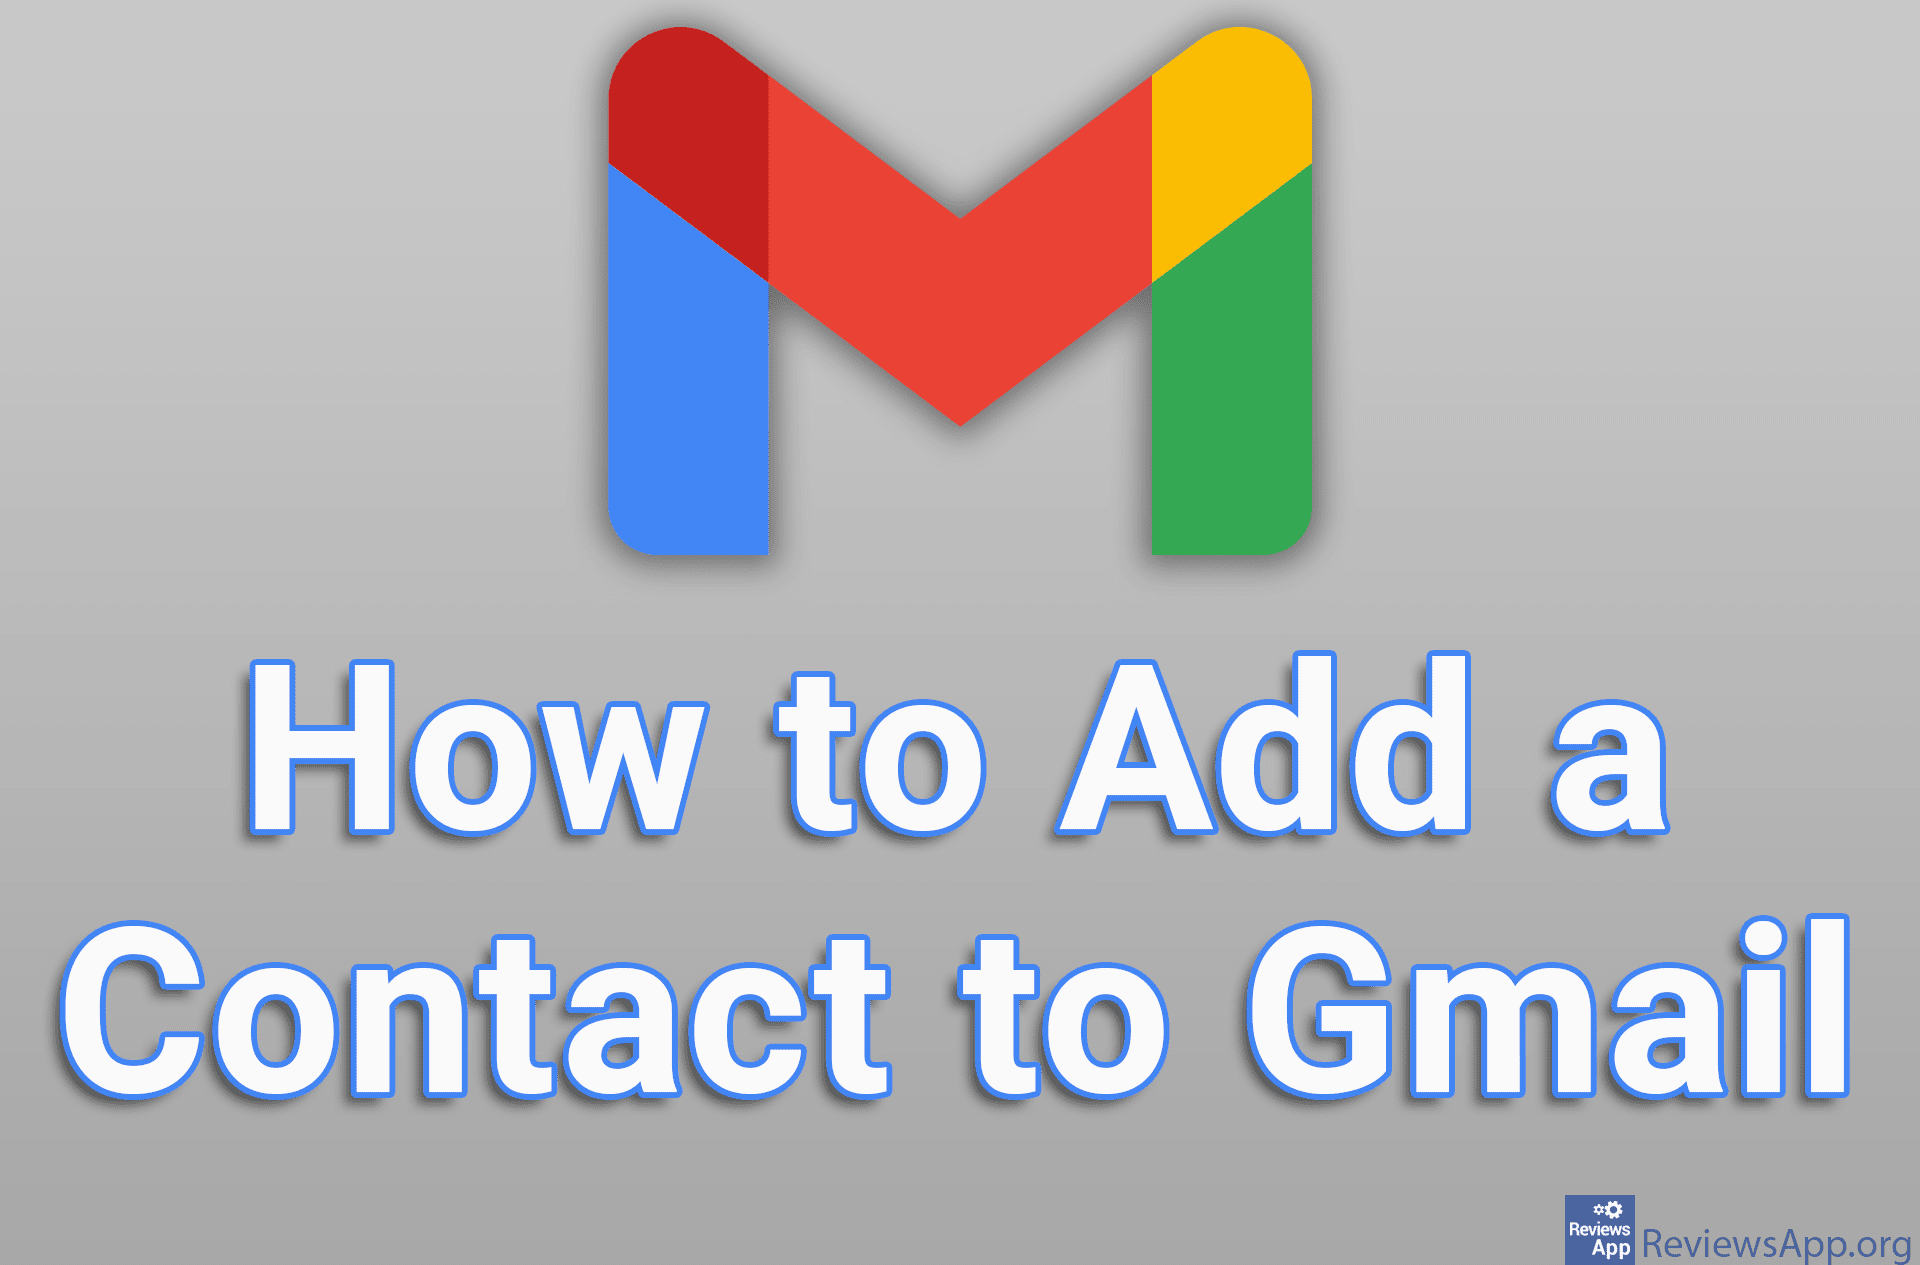 How to Add a Contact to Gmail